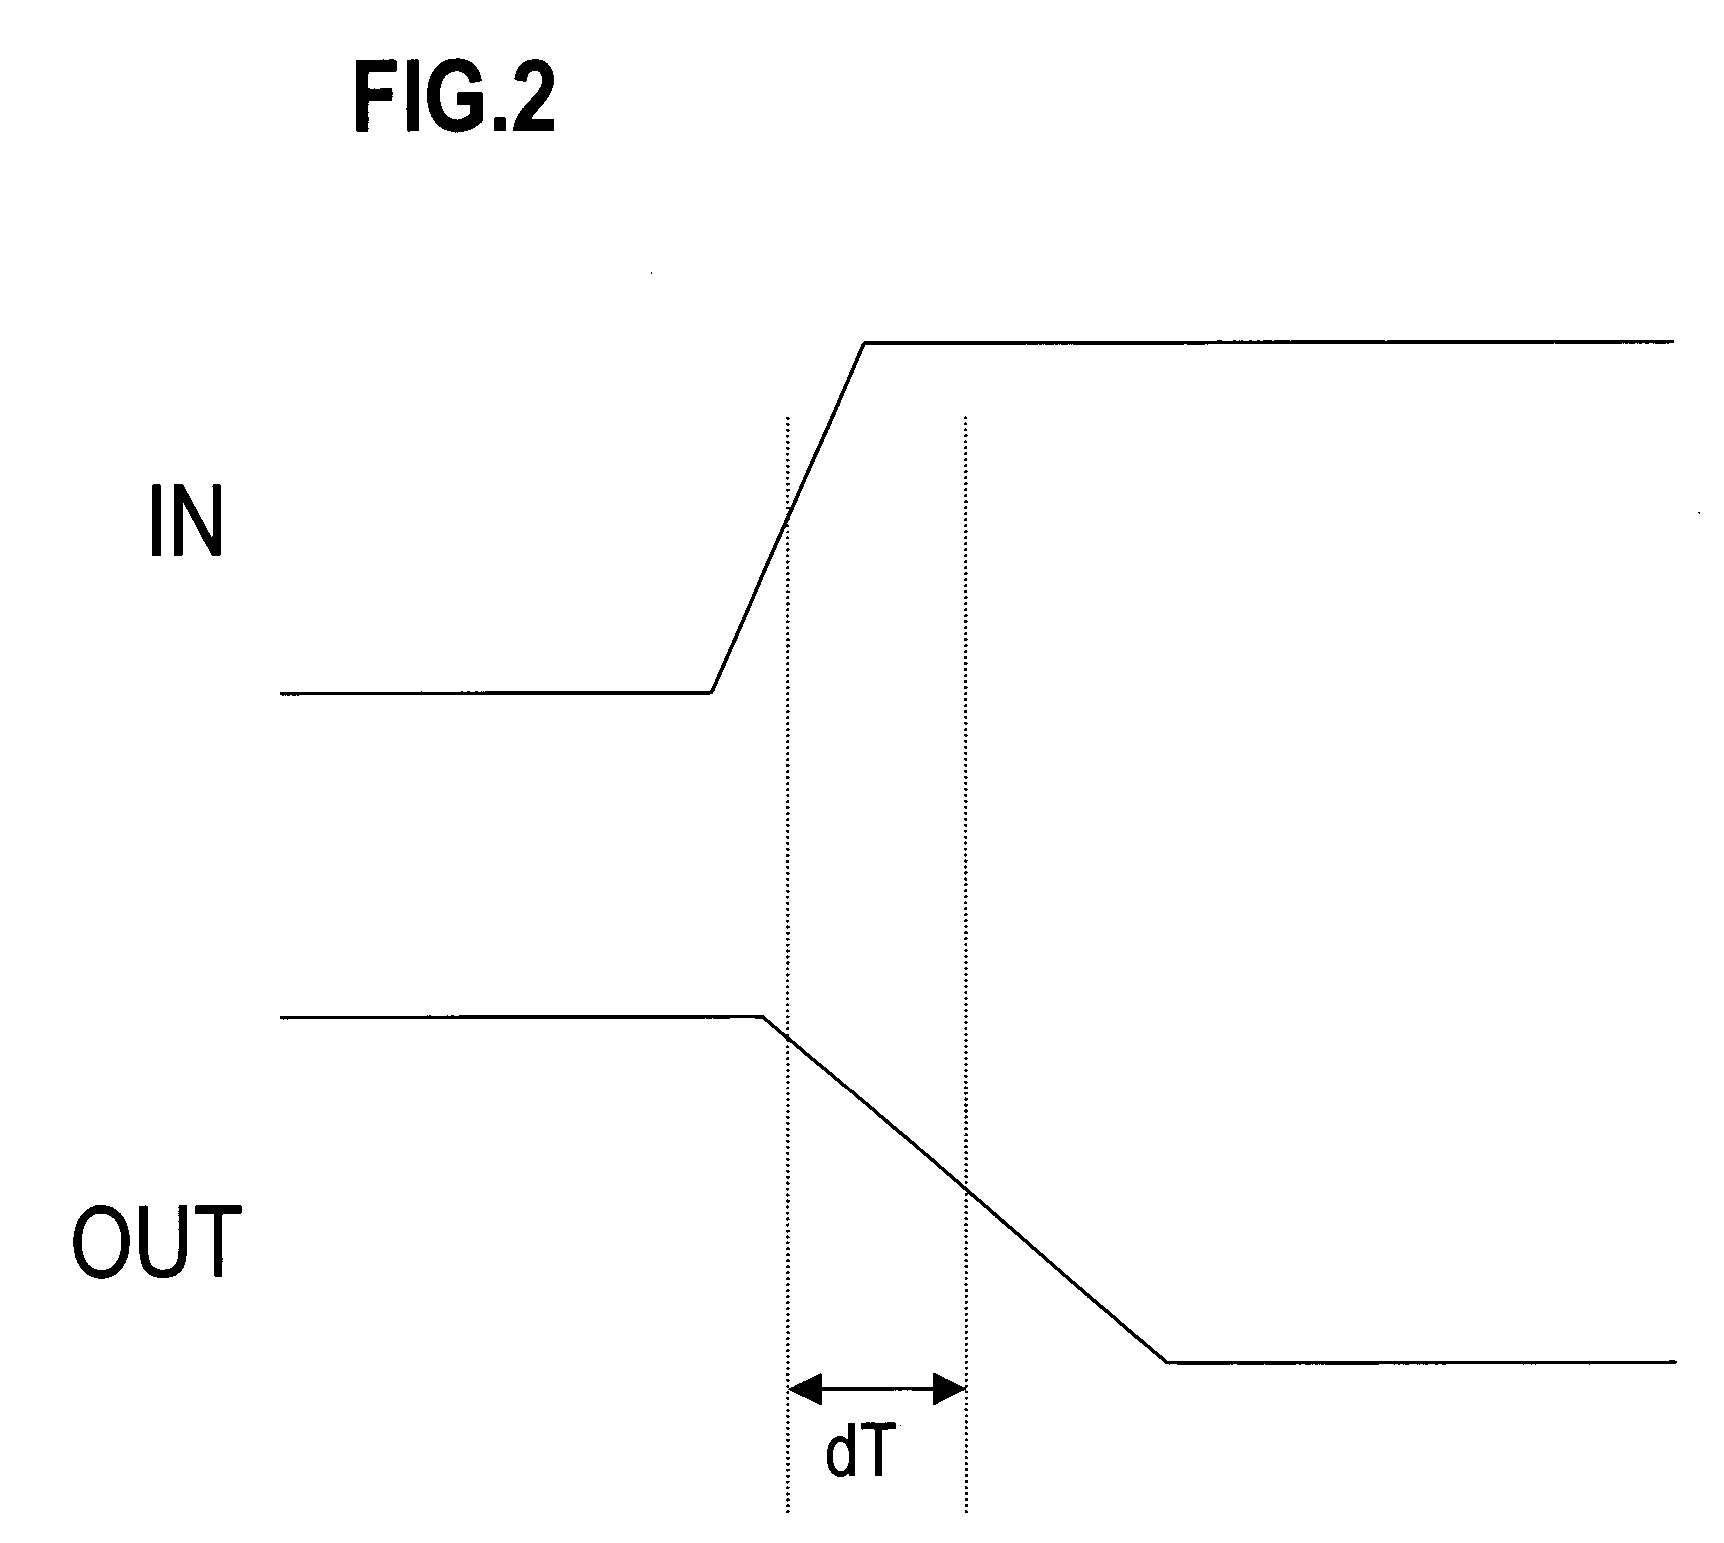 Method of generating cell library data for large scale integrated circuits